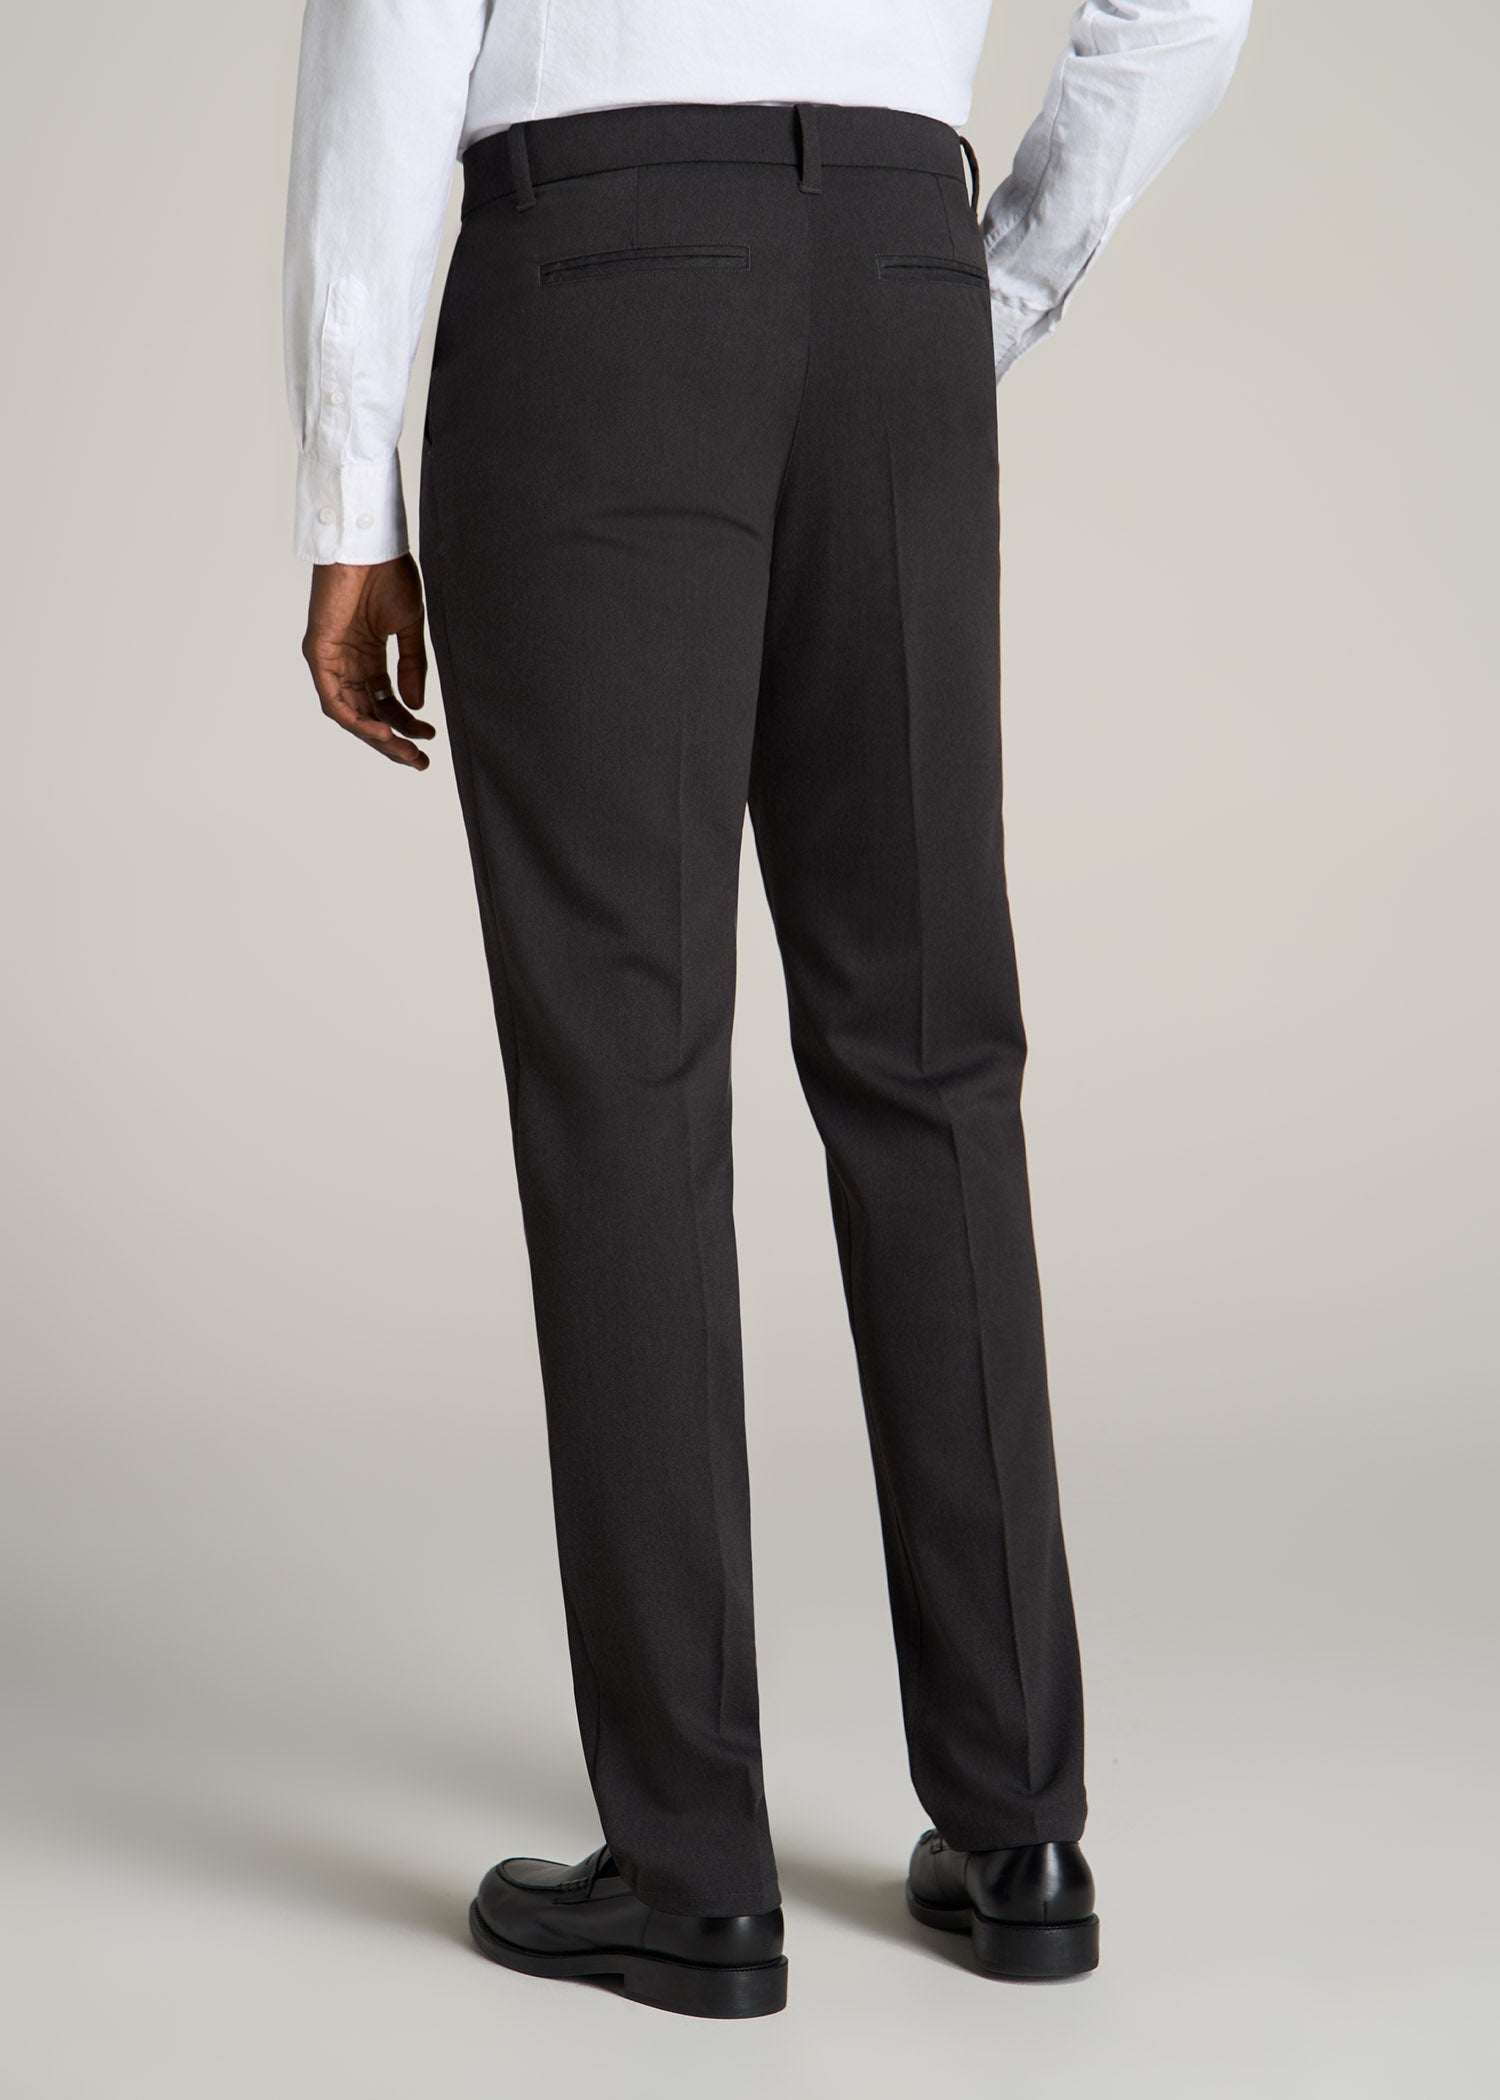 TAPERED-FIT Stretch Dress Pants for Tall Men in Charcoal Heather